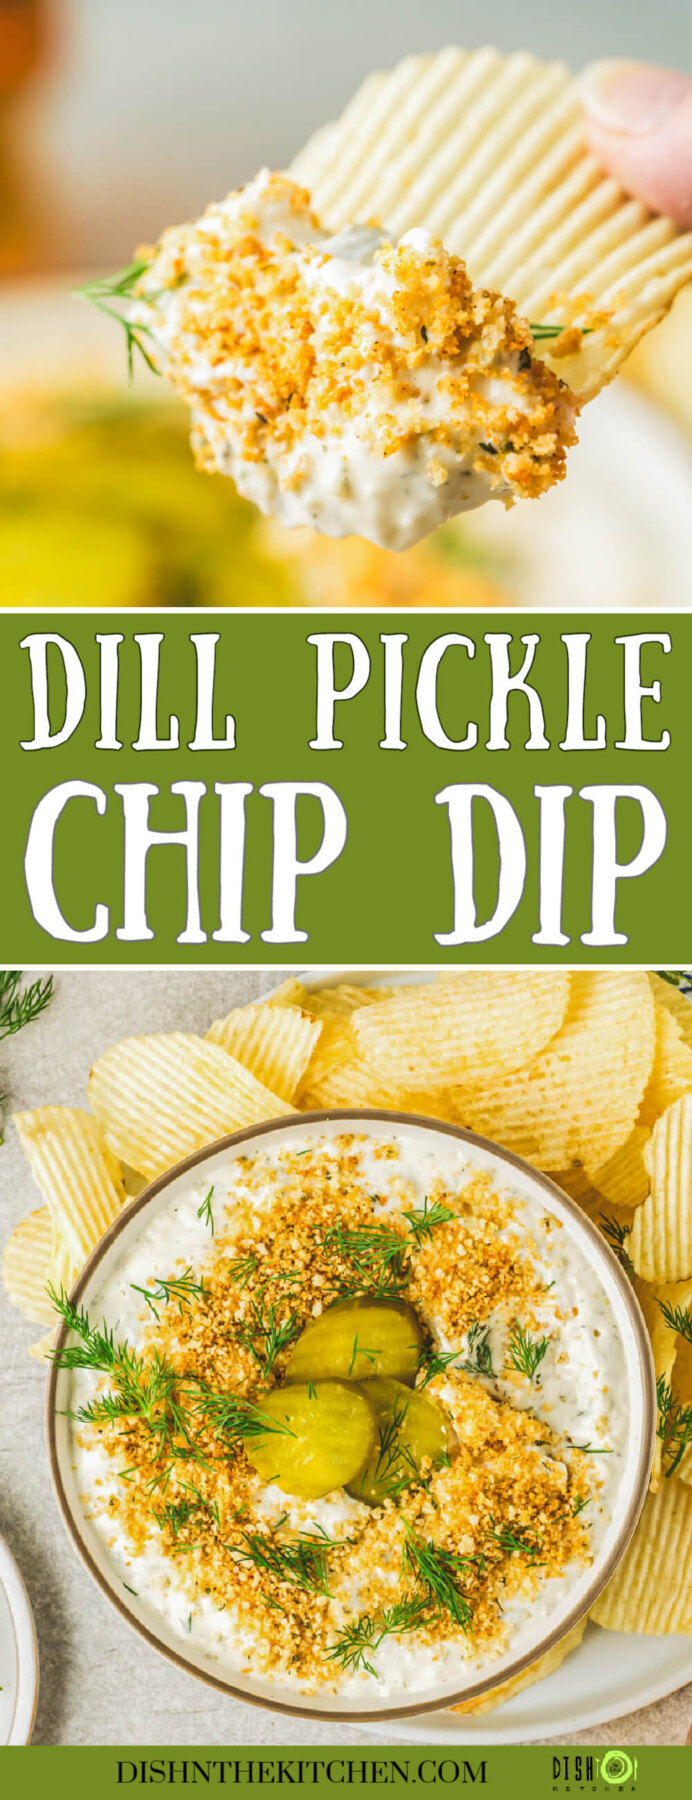 Pinterest image of a bowl of dill pickle dip topped with golden panko crumbs, fresh dill, and sliced dill pickles.